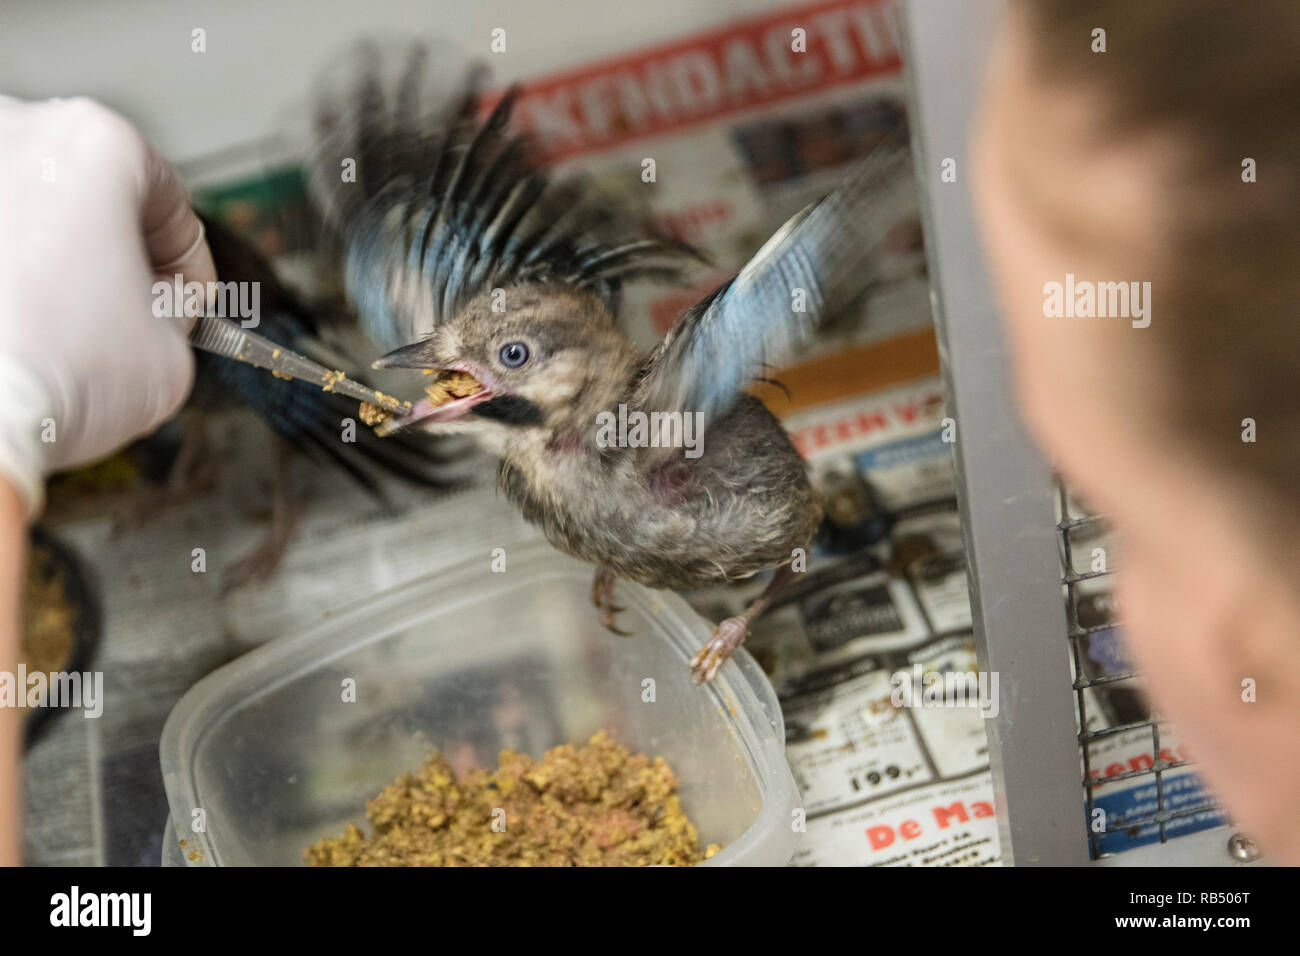 The Netherlands, Amsterdam, Bijlmermeer, Animal Rescue Center DeToevlucht. Young Jay. Stock Photo